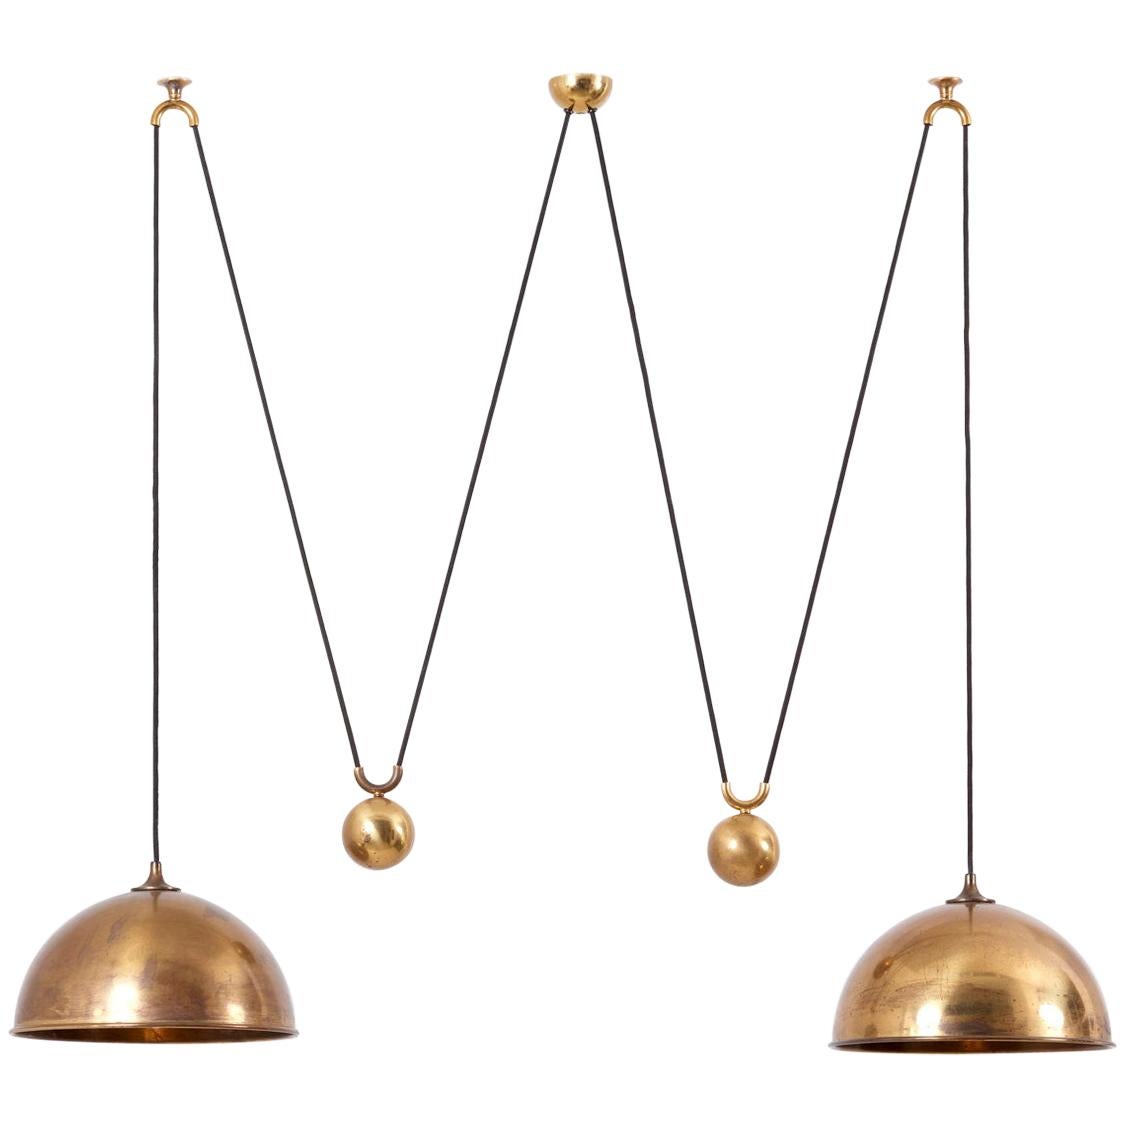 Double Posa Pendant Lamp with Side Counter Weights by Florian Schulz, 1970s